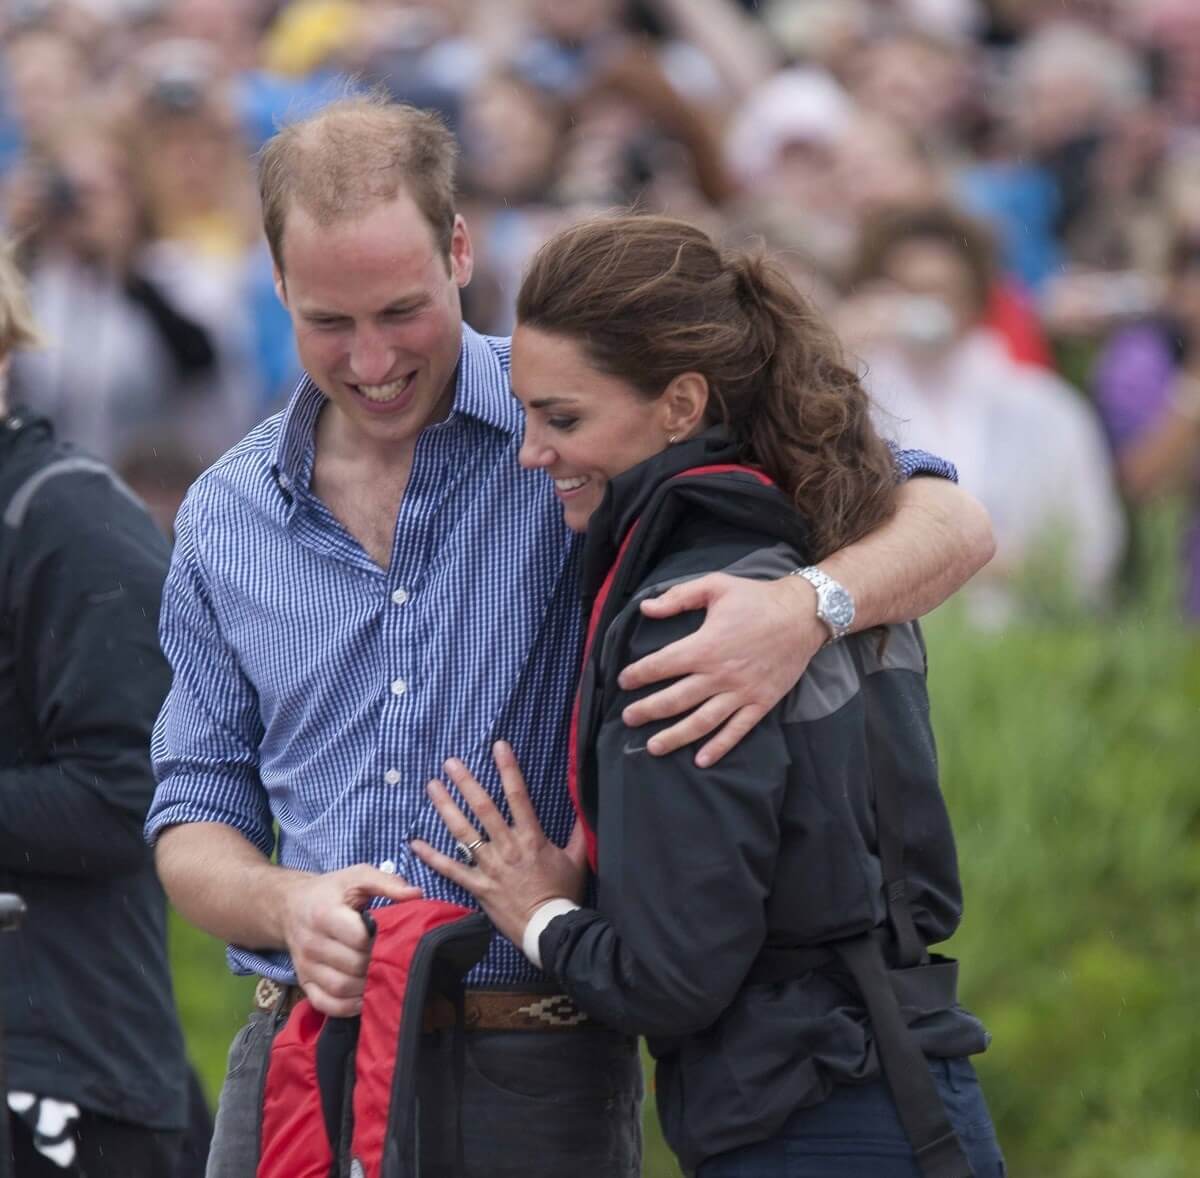 Prince William and Kate Middleton hug after taking part in a dragon boat race